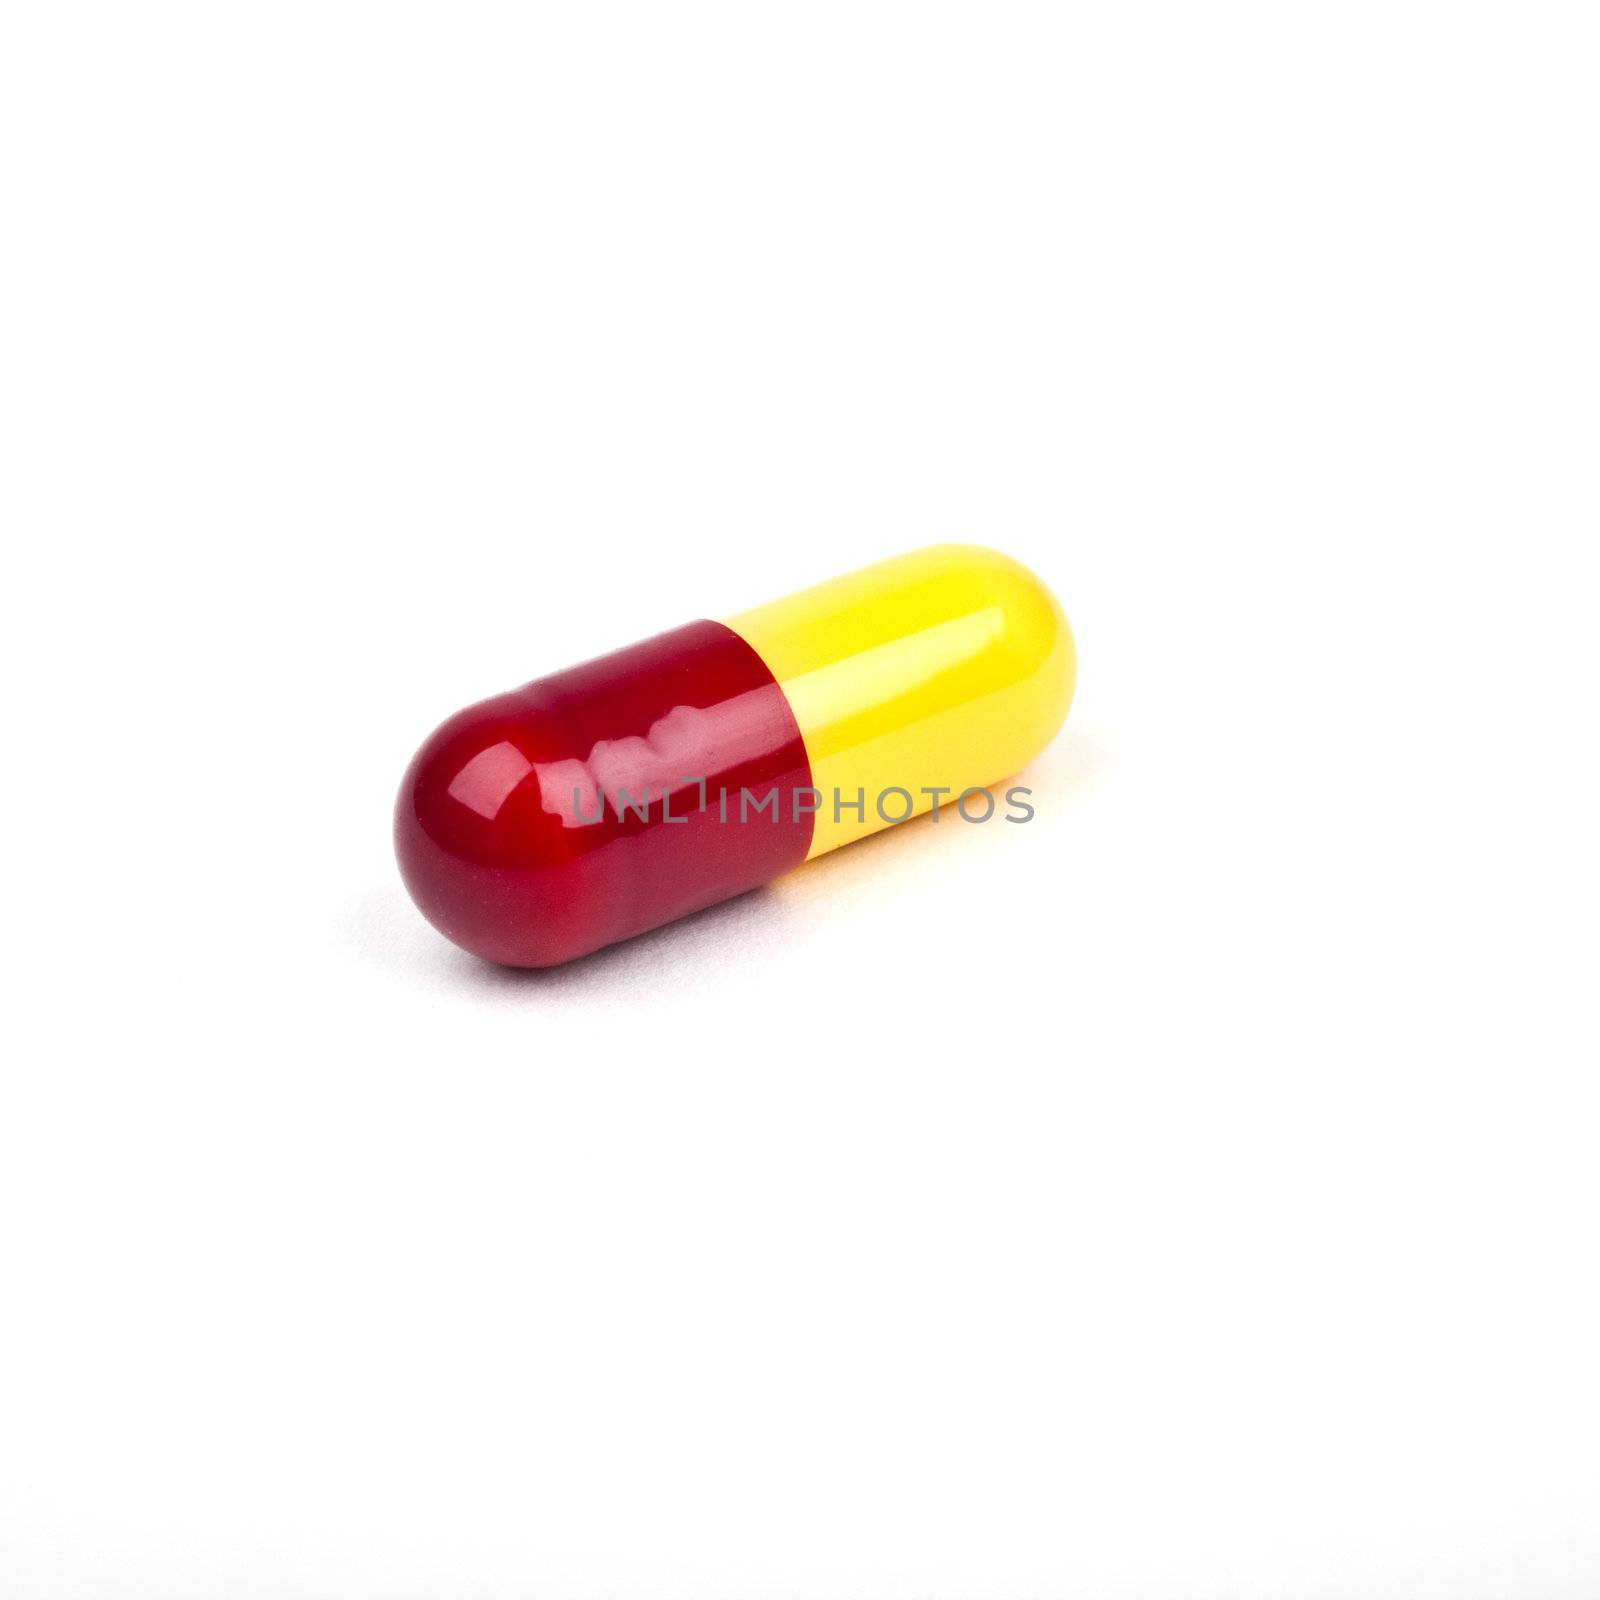 A solitary Pill on a white background.